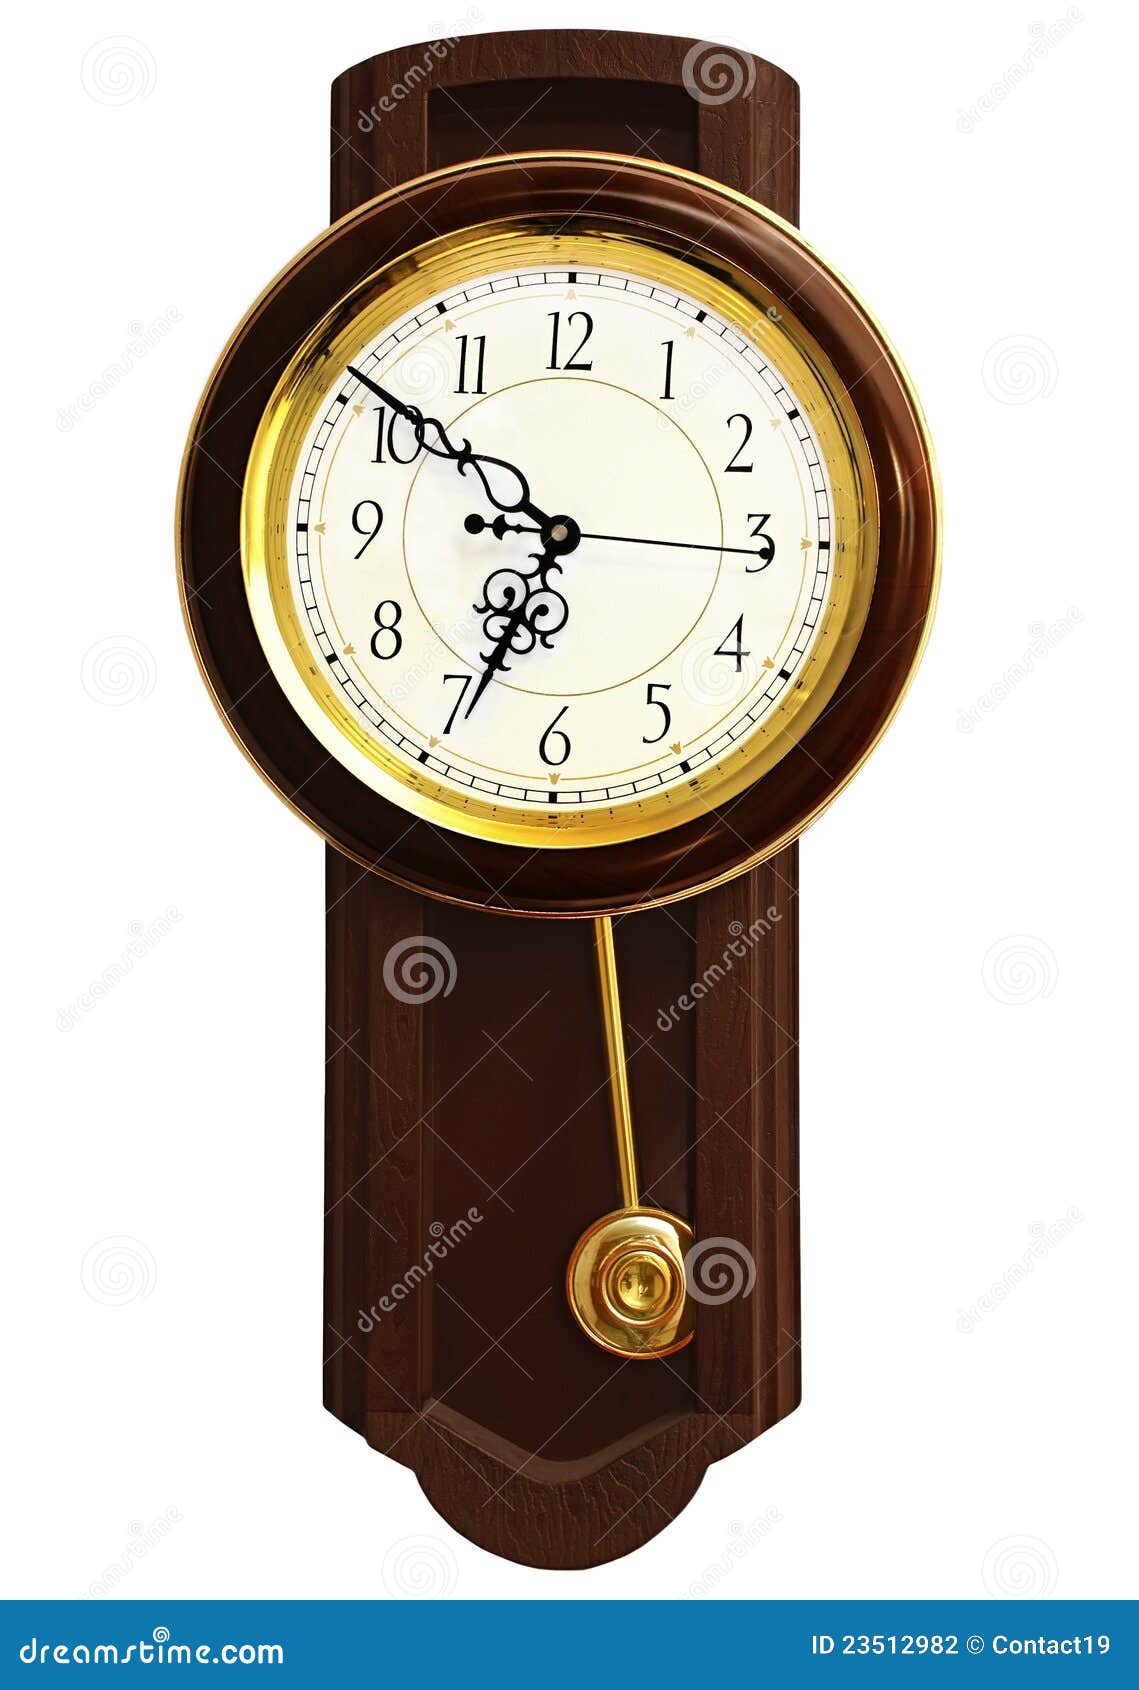 Wooden Wall Clock Stock Photography - Image: 23512982